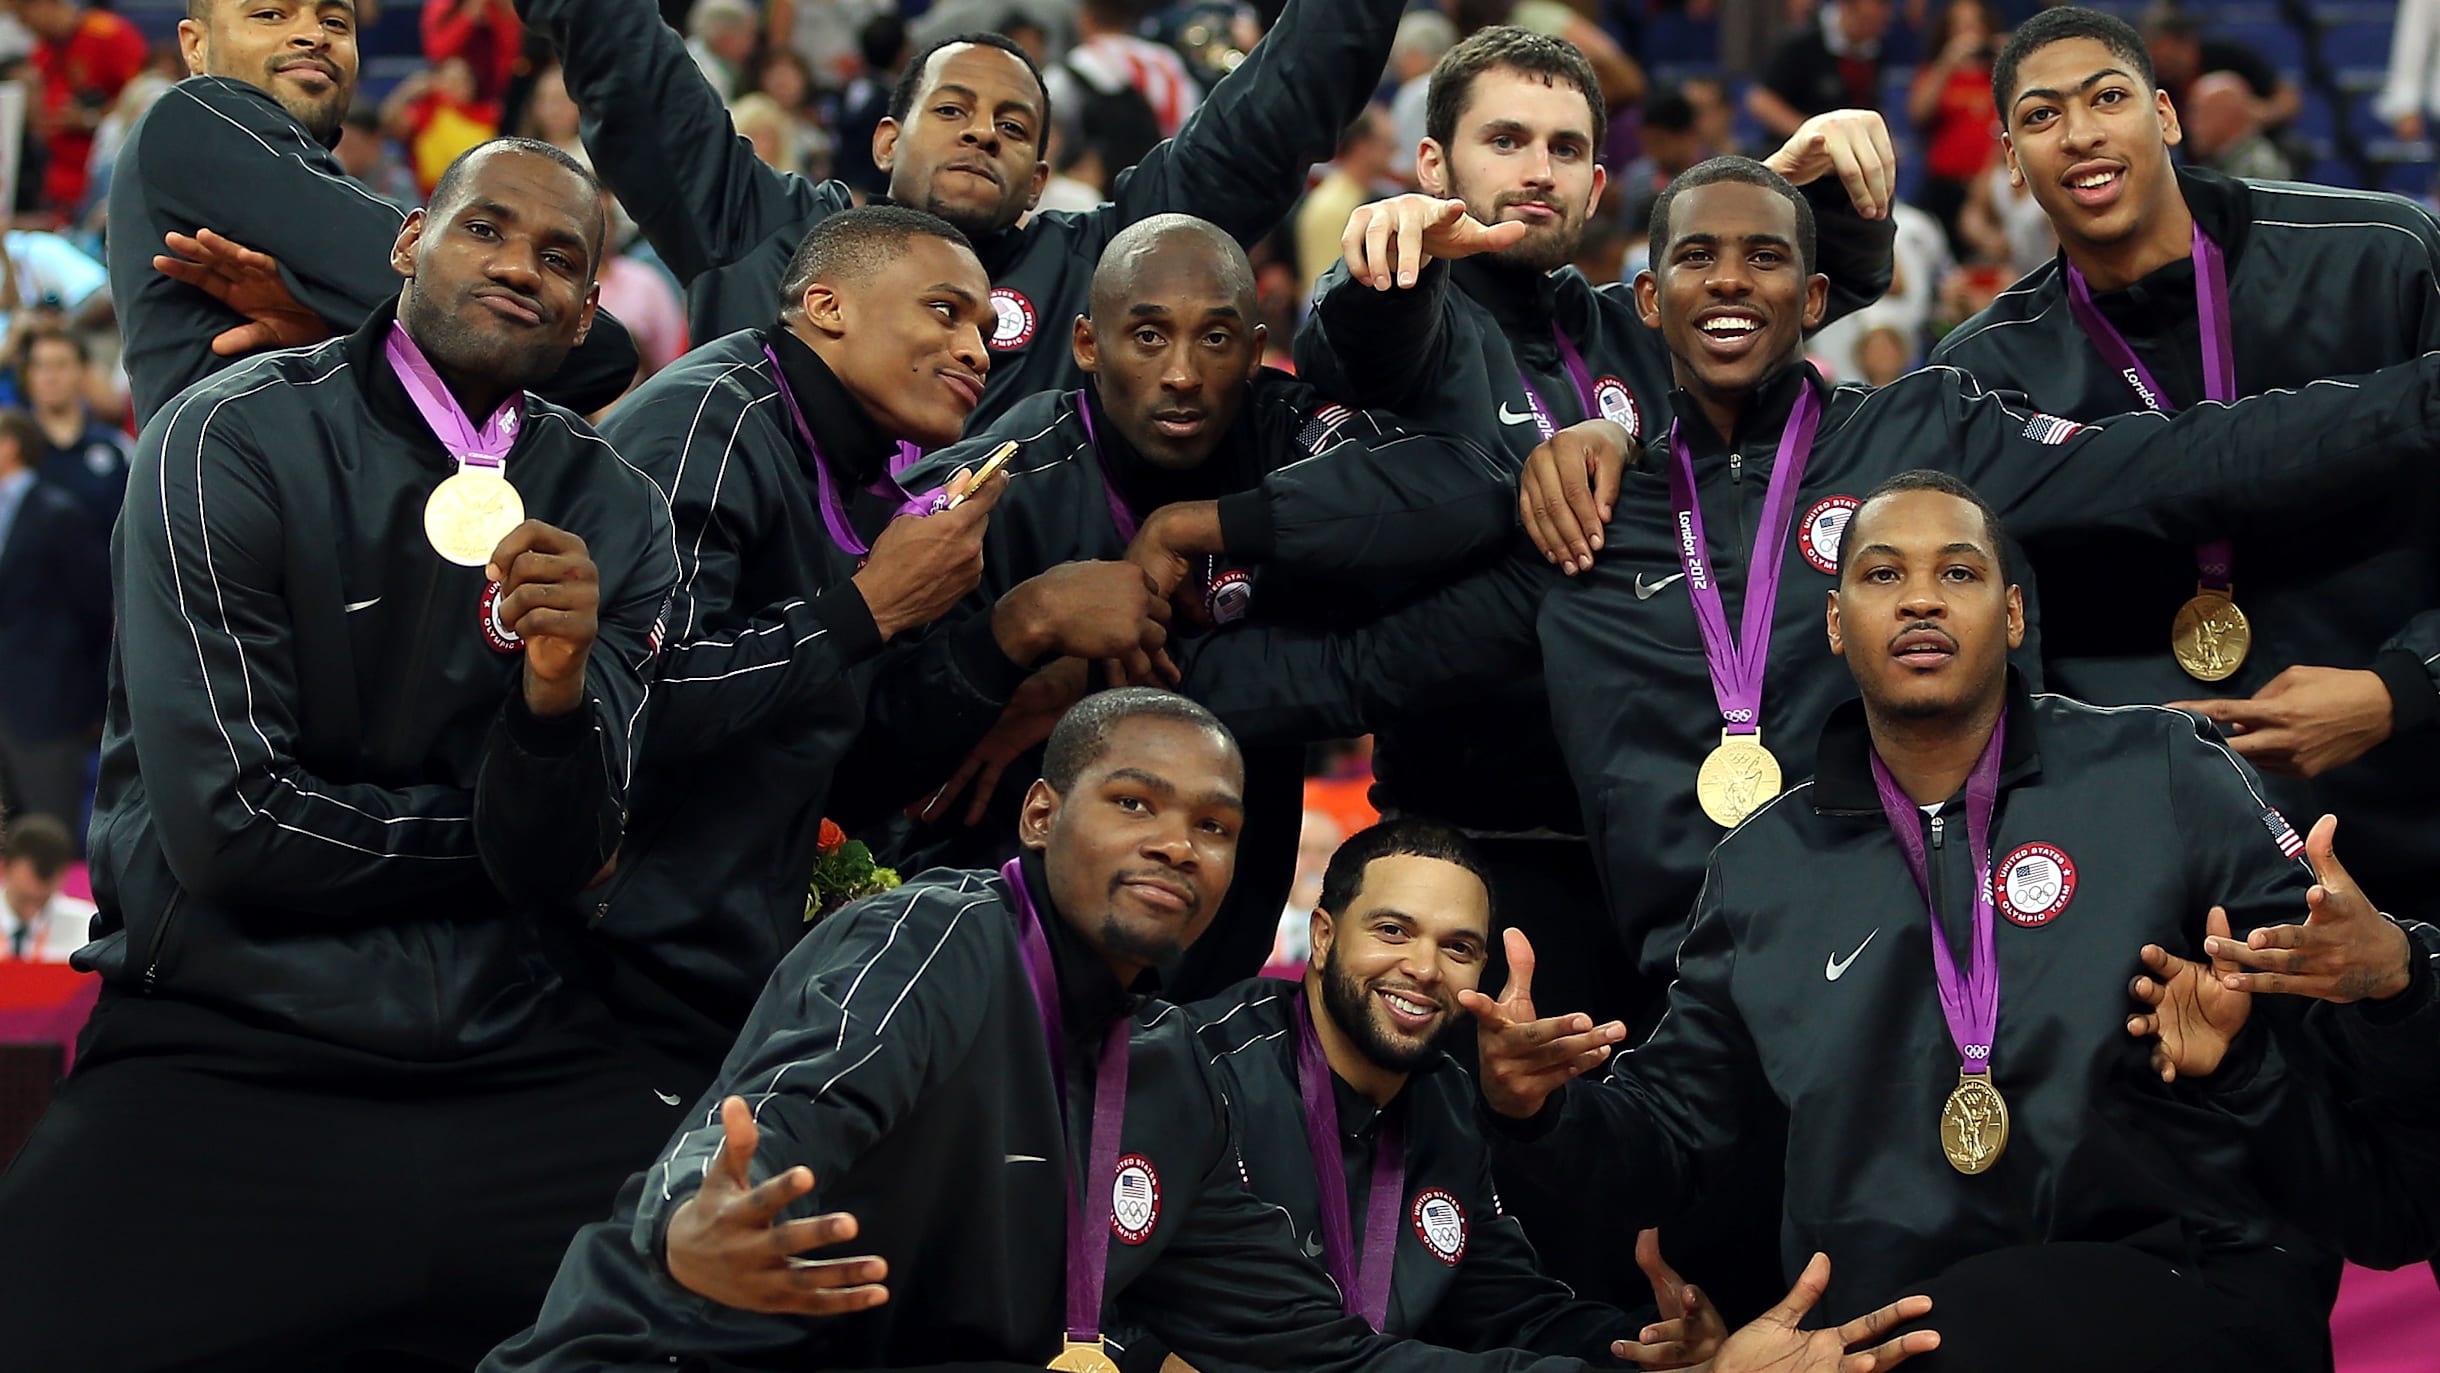 Olympic basketball: History, top teams and all you need to know